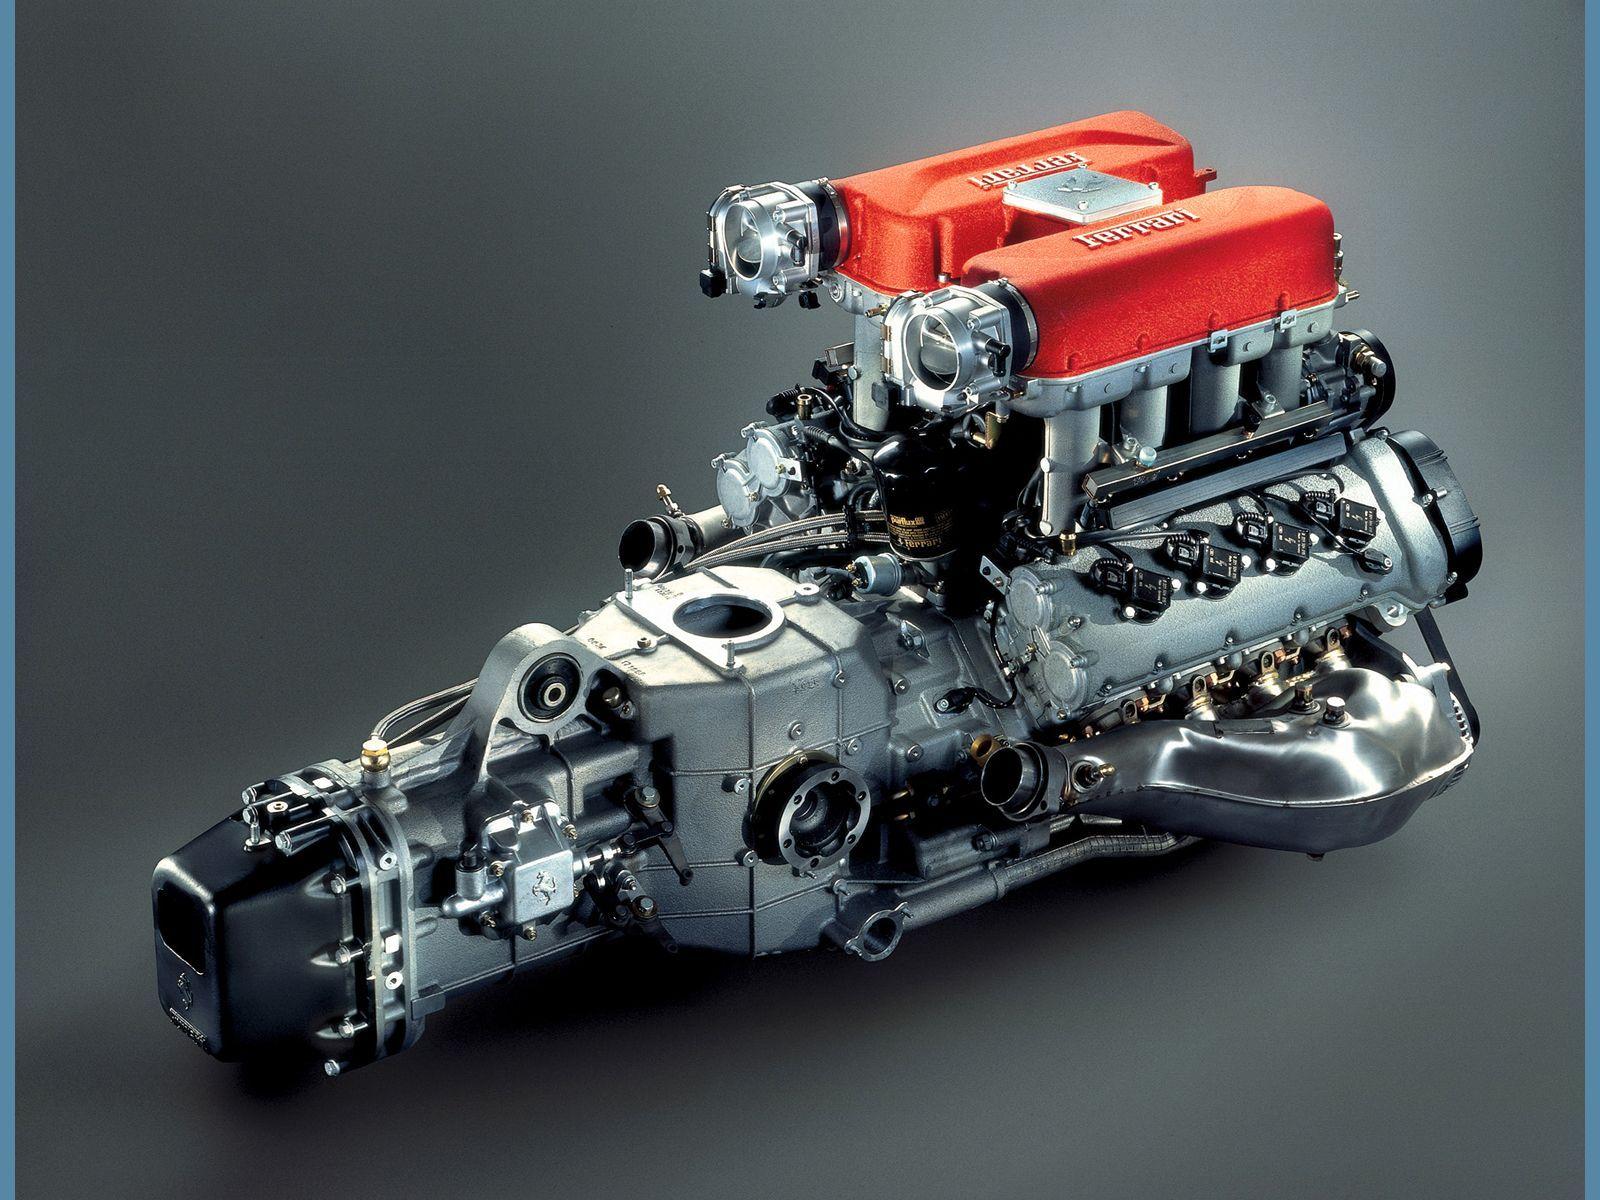 40 HD Engine Wallpapers, Engine Backgrounds & Engine Image For